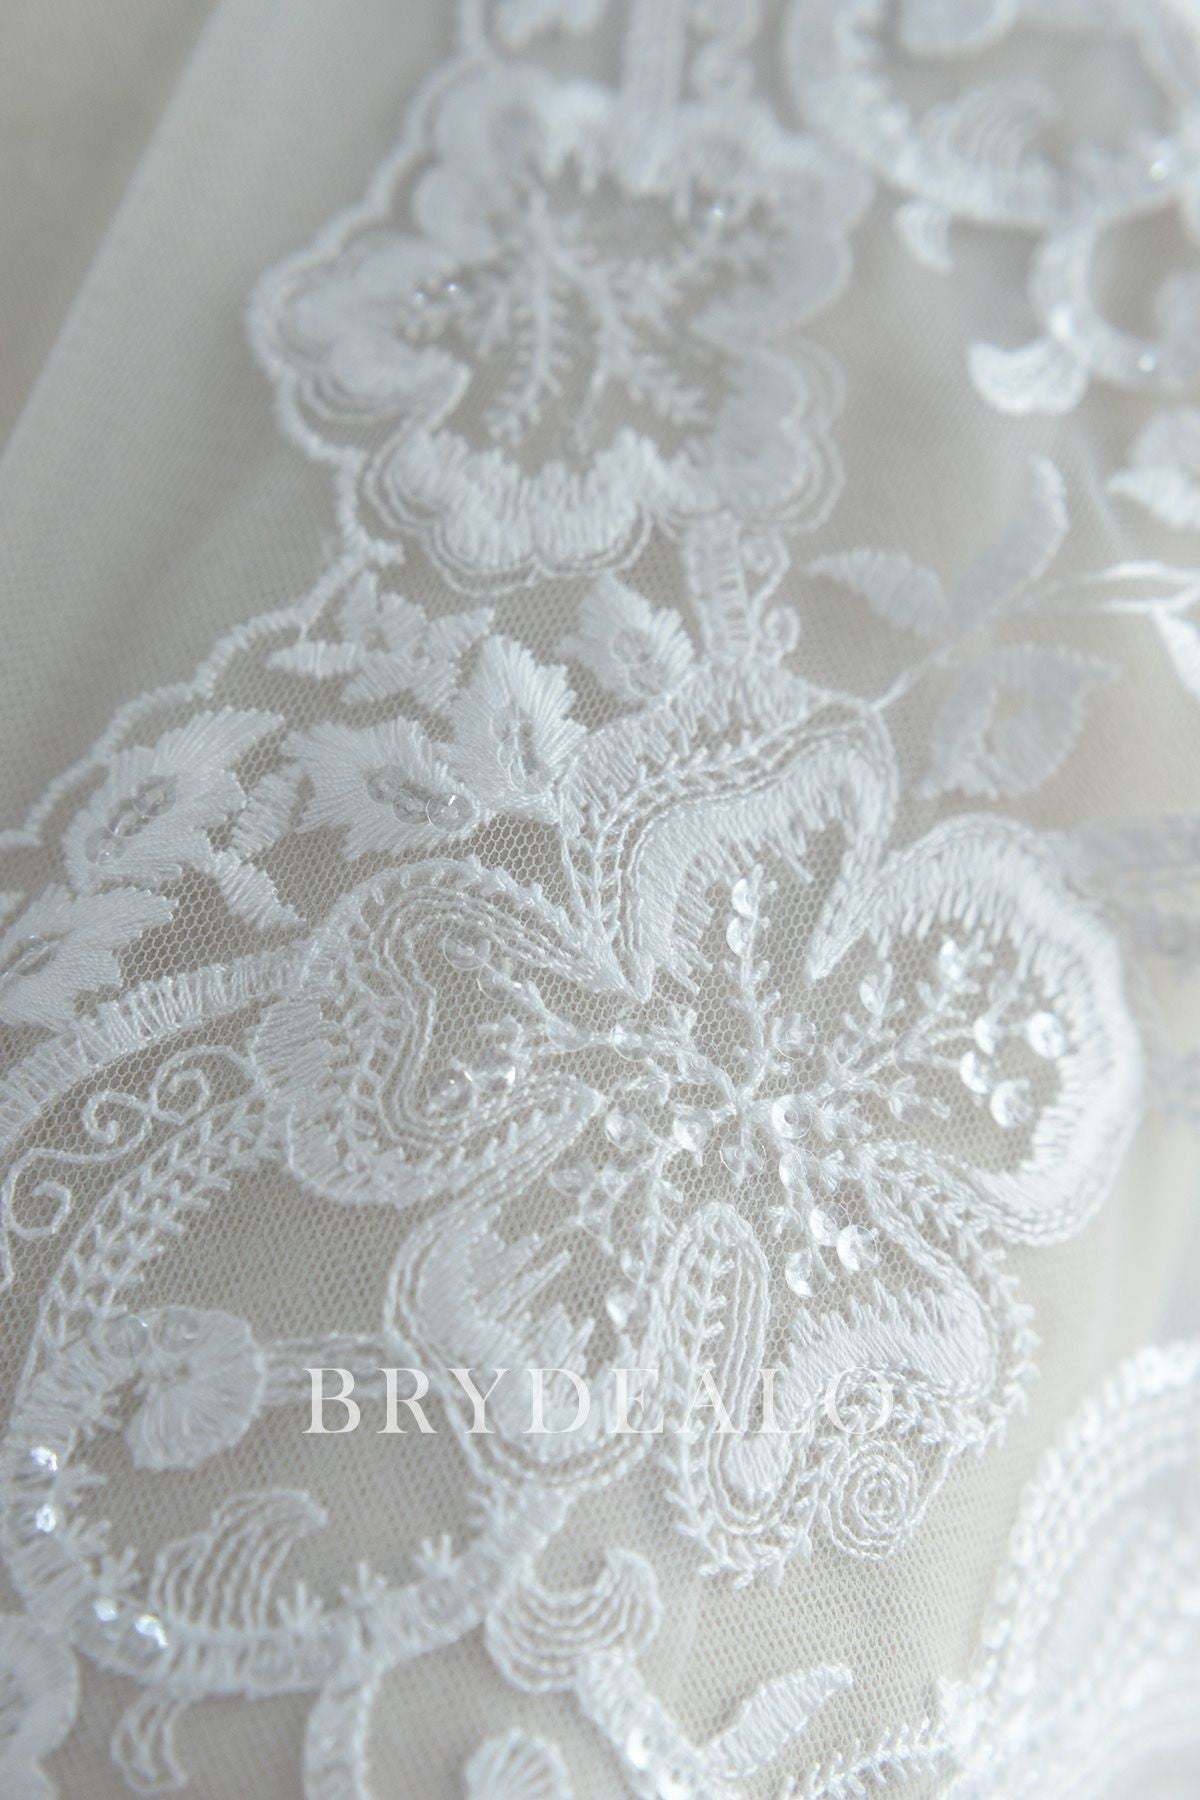 Best Double Border Lace Fabric with Cording